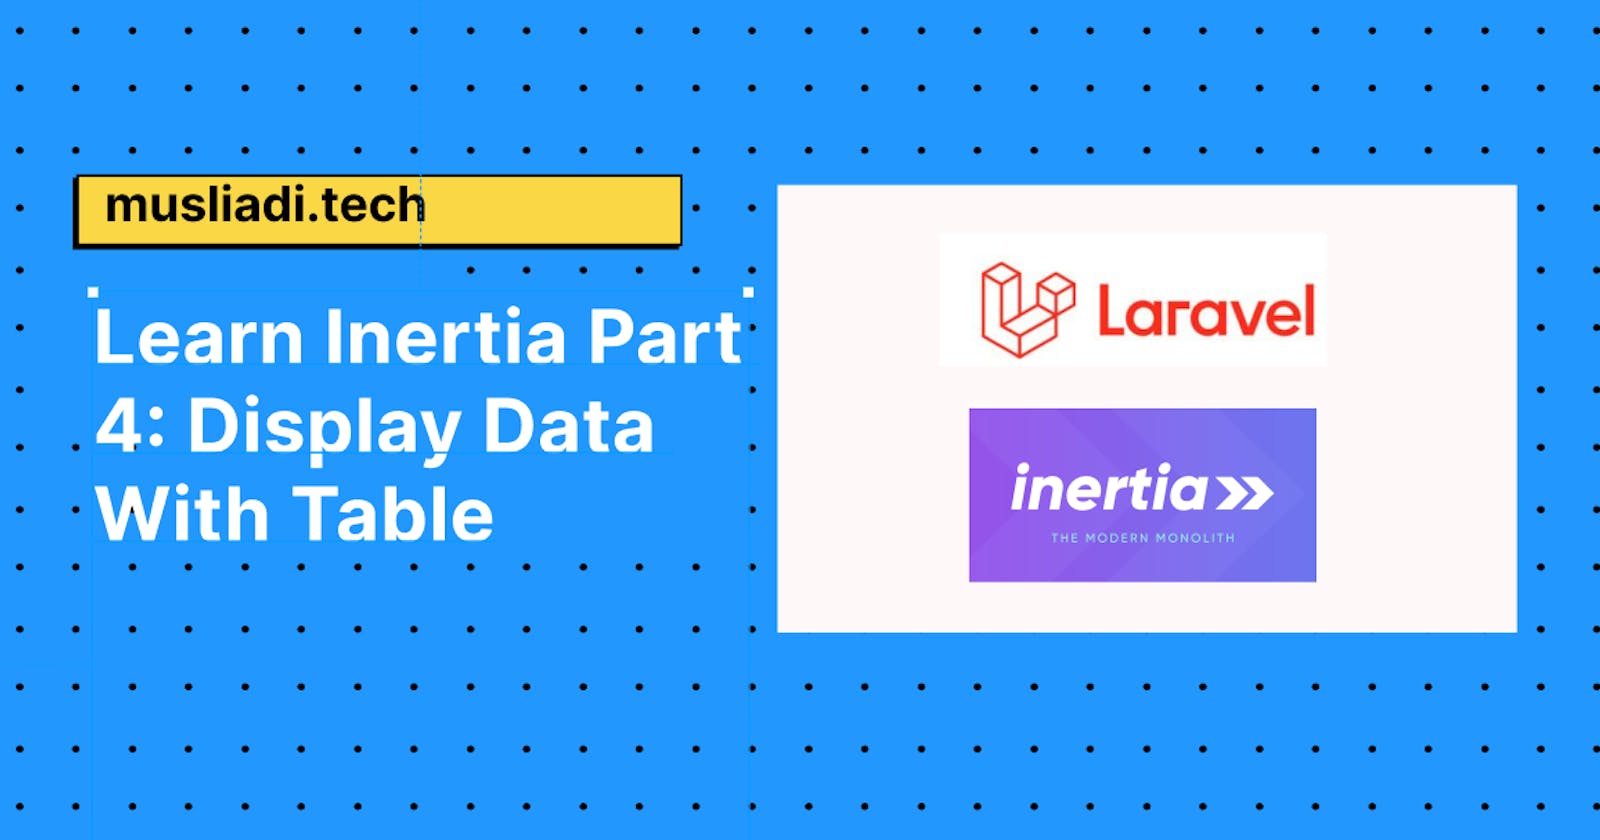 Learn Inertia Part 4: Display Data With Table